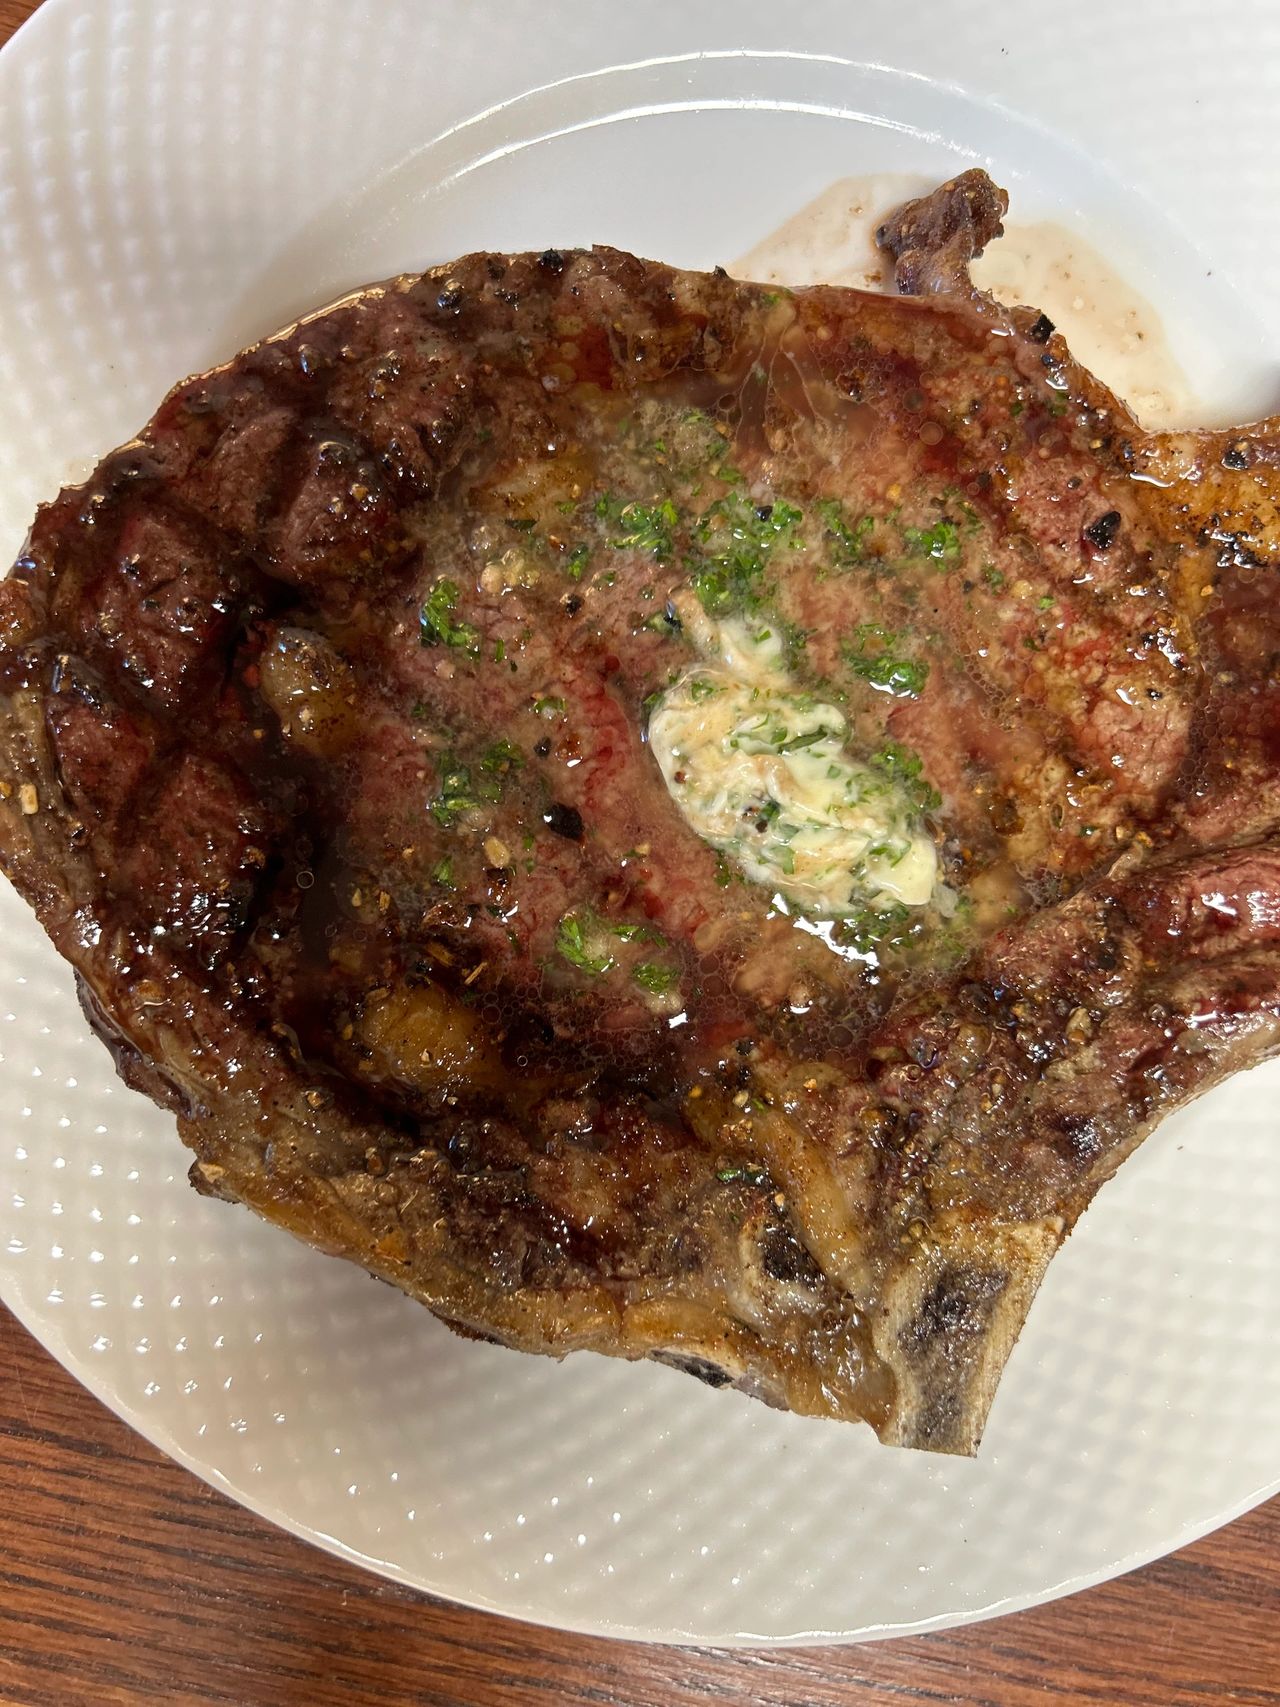 Herb butter takes the steak from 100% to 150%!